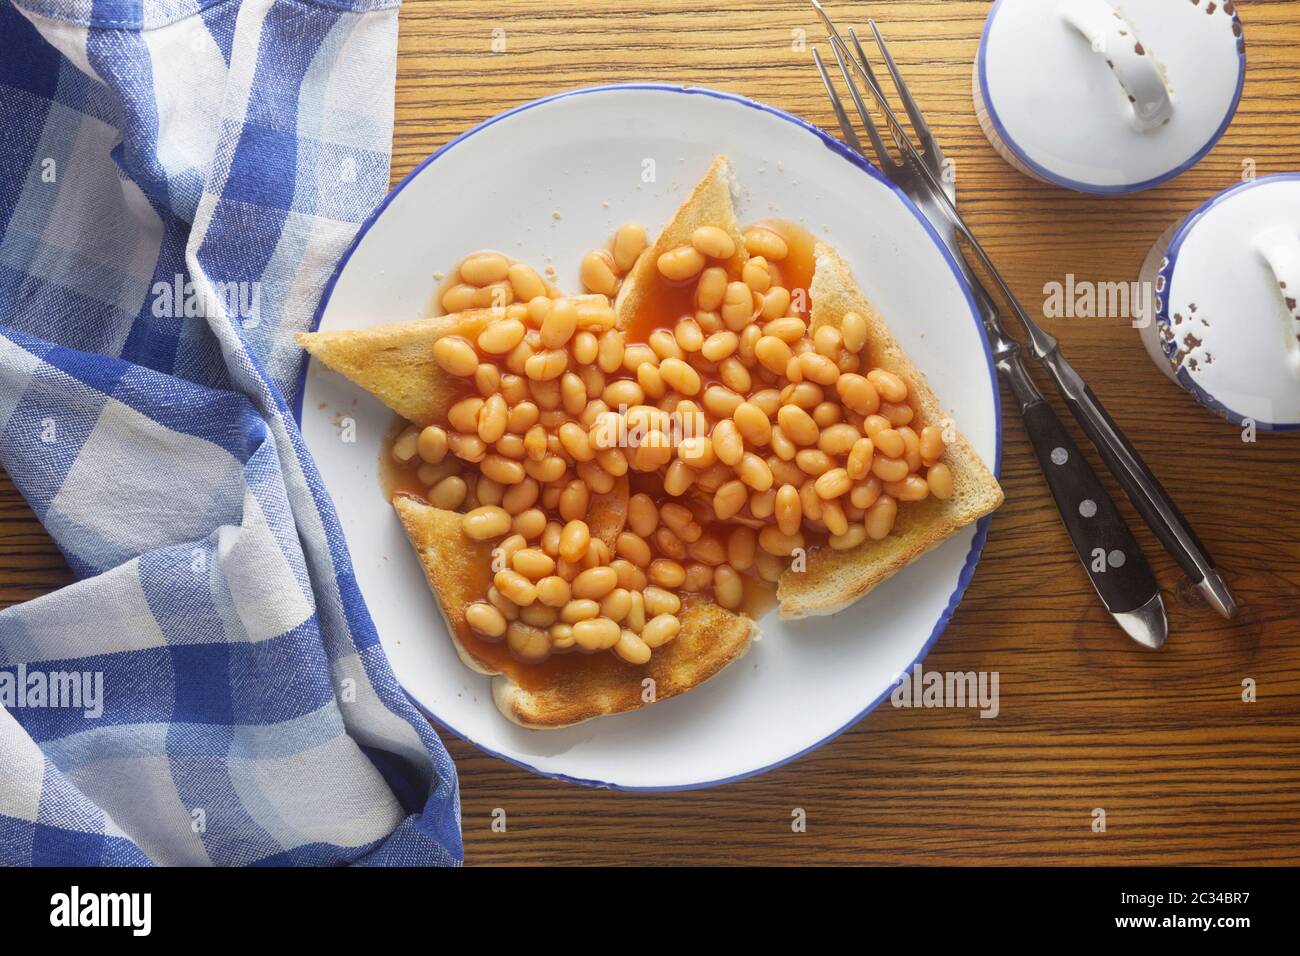 Baked Beans On Toast On A Wooden Background Stock Photo